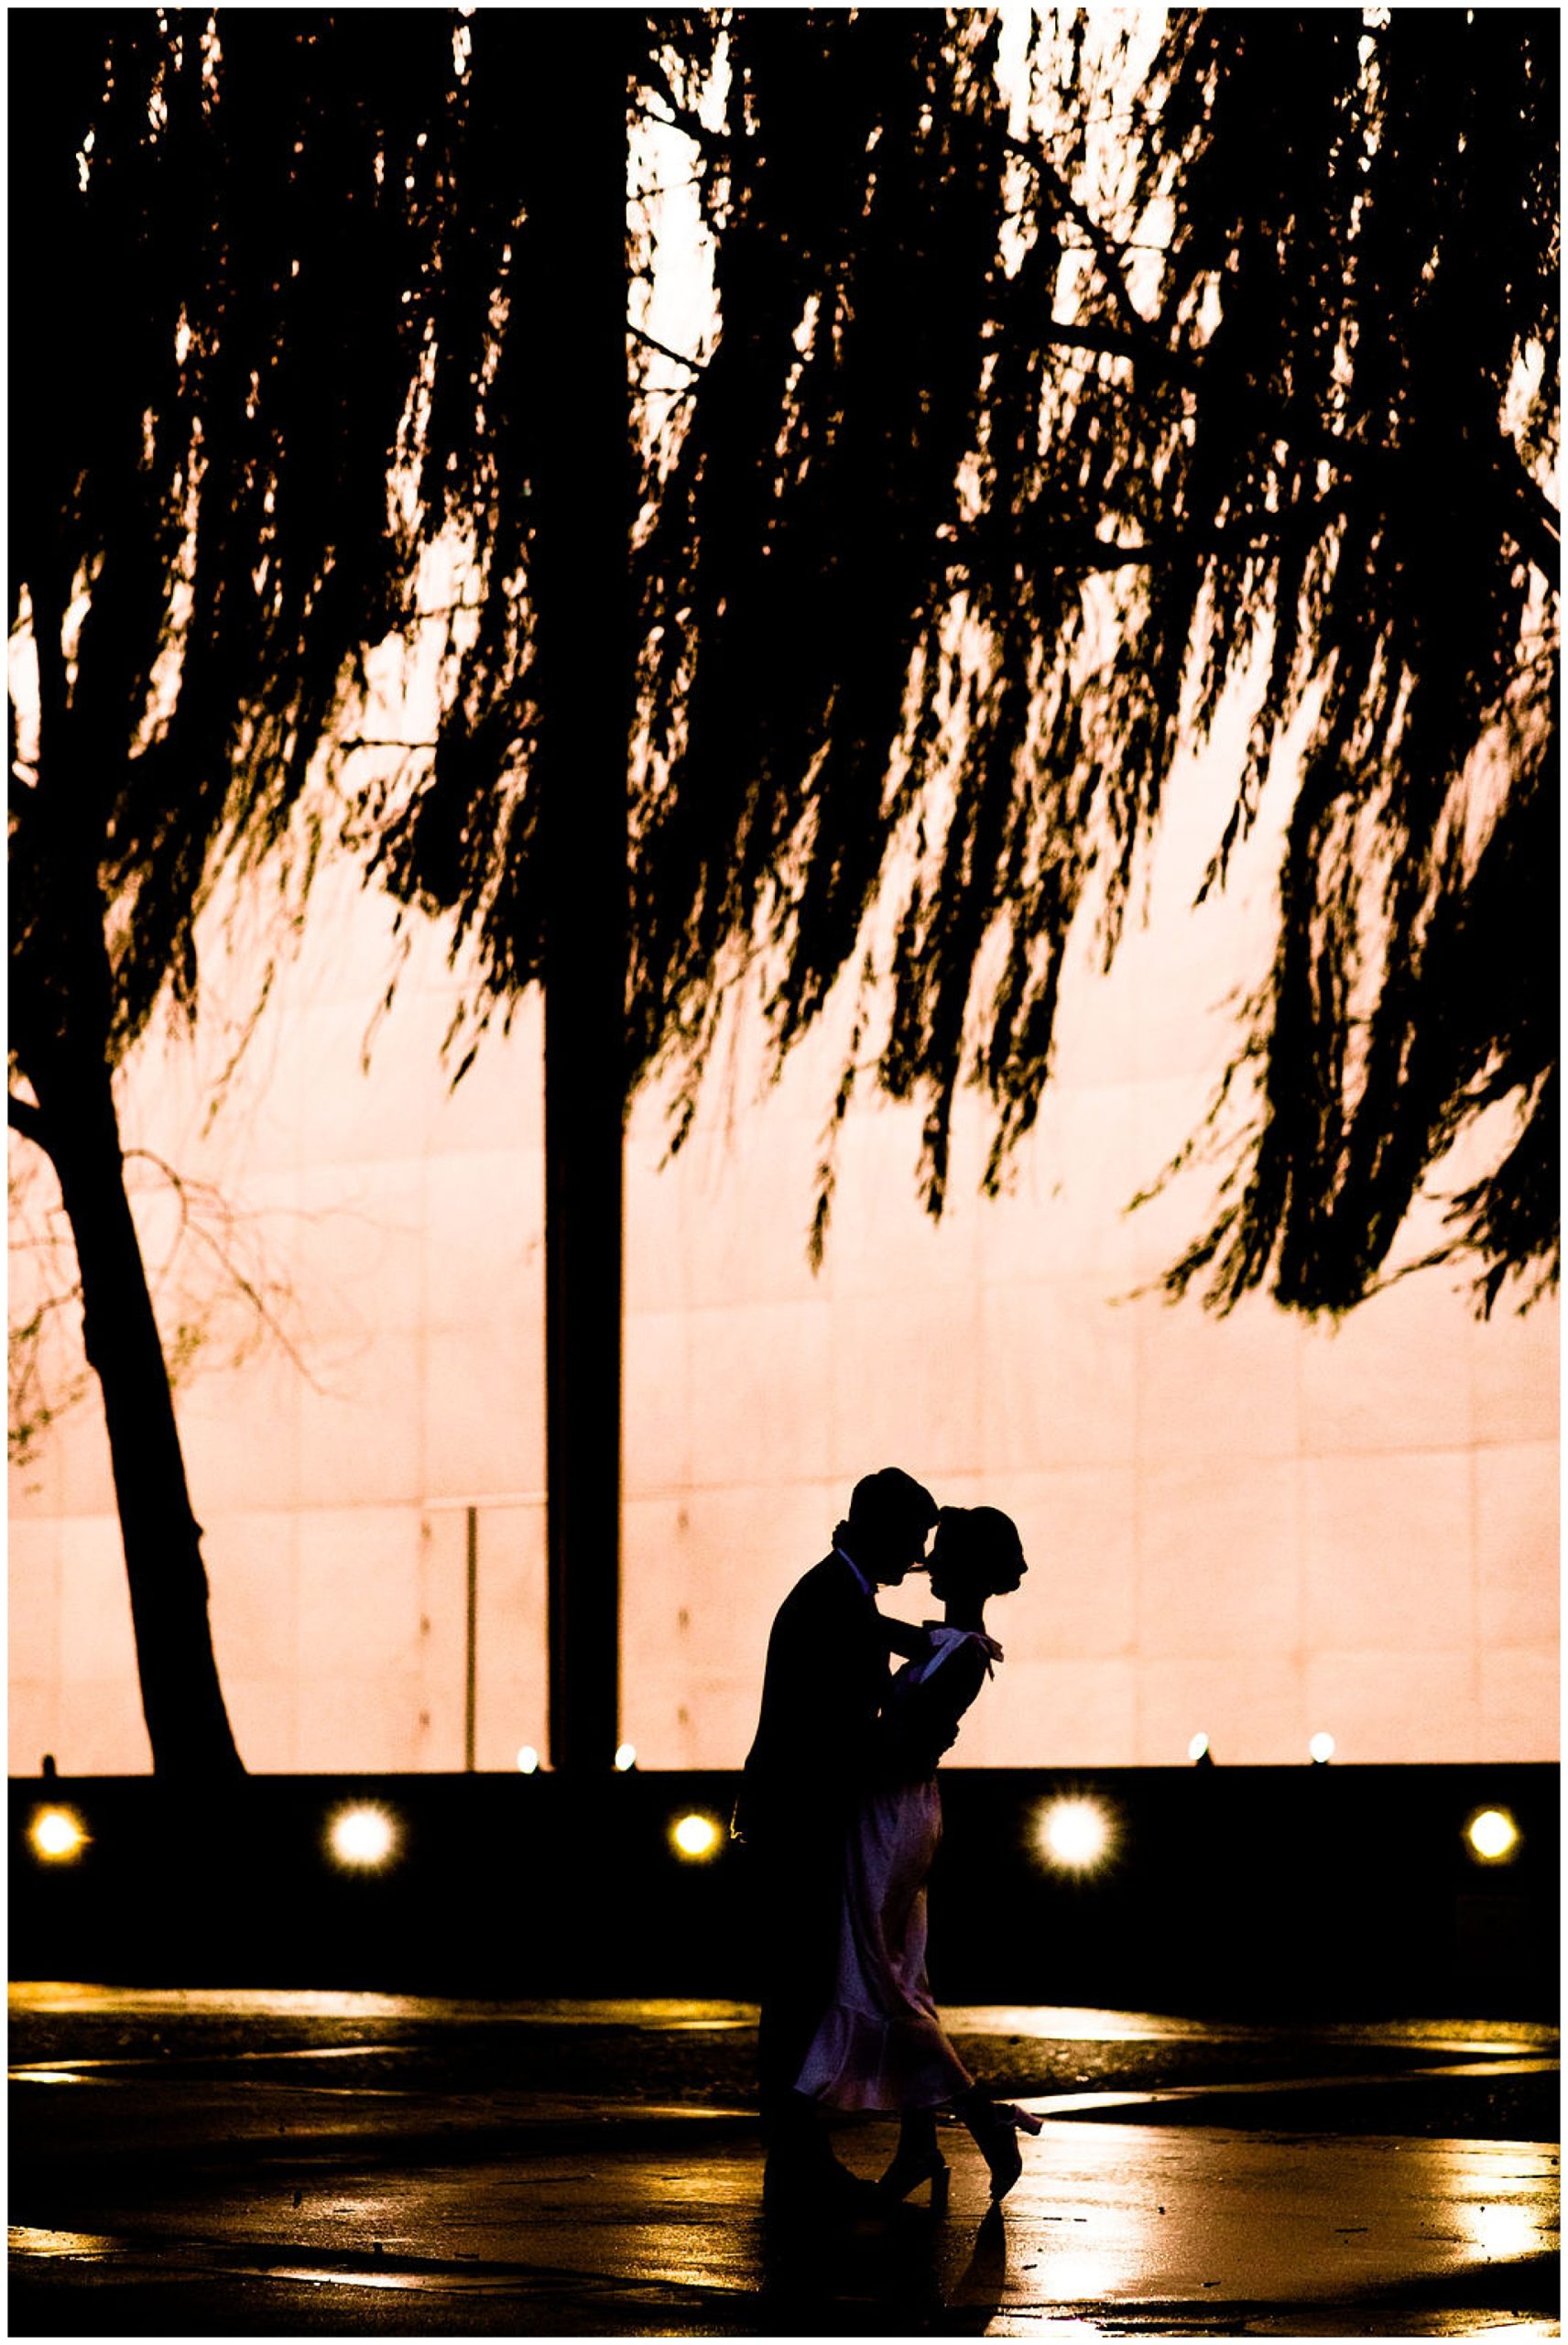 romantic Kennedy Center elopement, Washington DC elopement photographer, Kennedy Center photographer, Kennedy Center portraits, rainy elopement, natural light elopement photography, DC elopement, DC wedding photographer, Rachel E.H. Photography, romantic elopement, silhouette of couple almost kissing